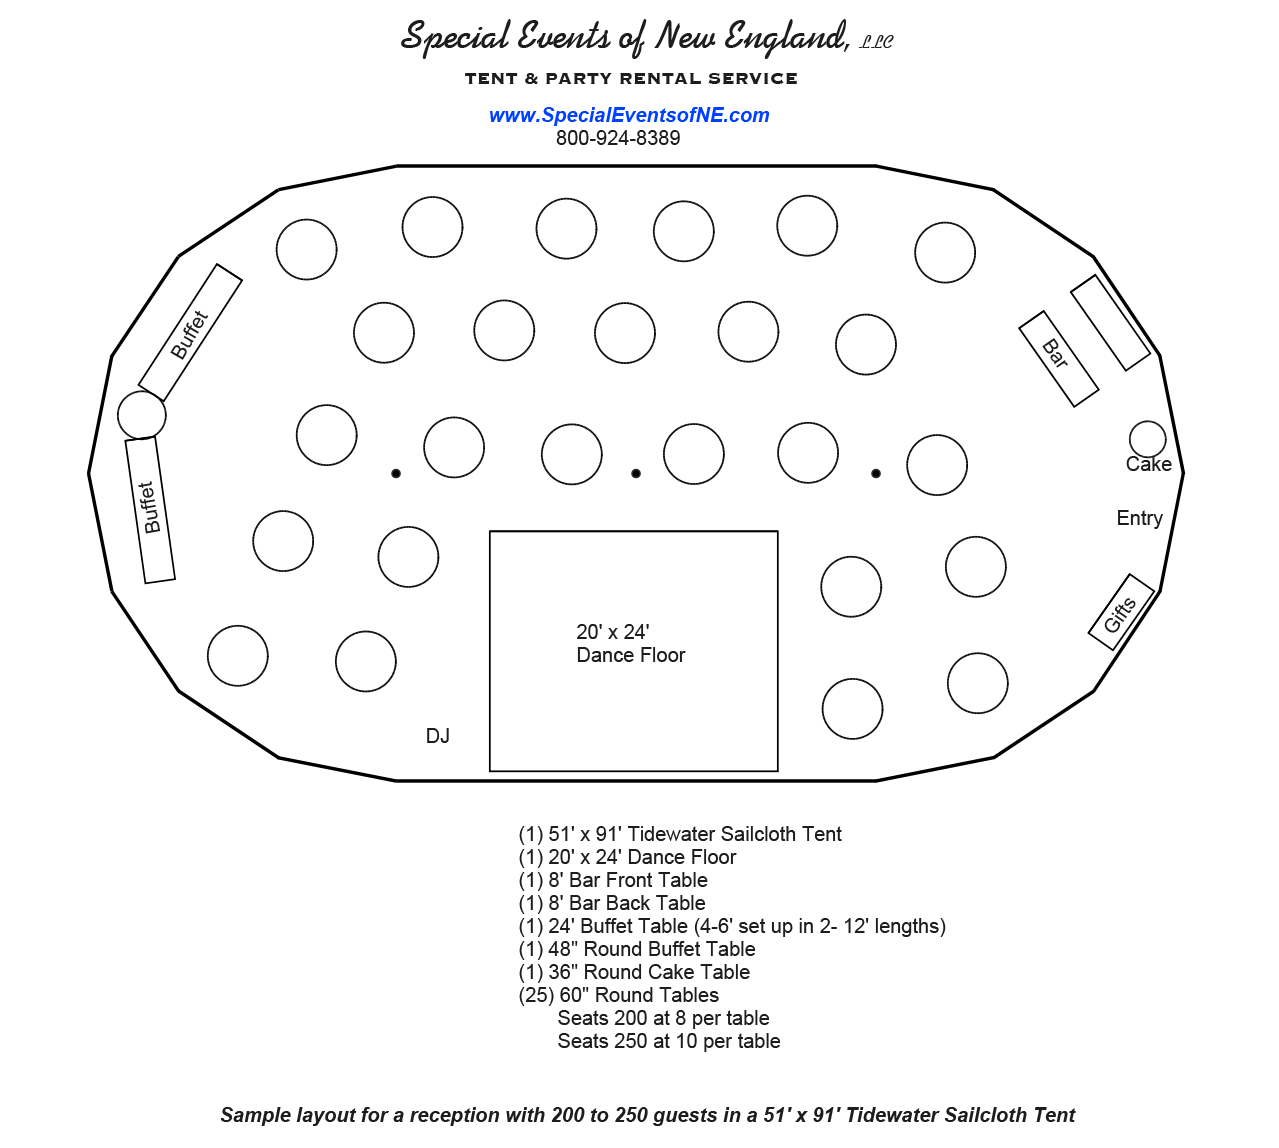 Tent Layout Options Get The Right, How Many Round Tables For 250 Guests